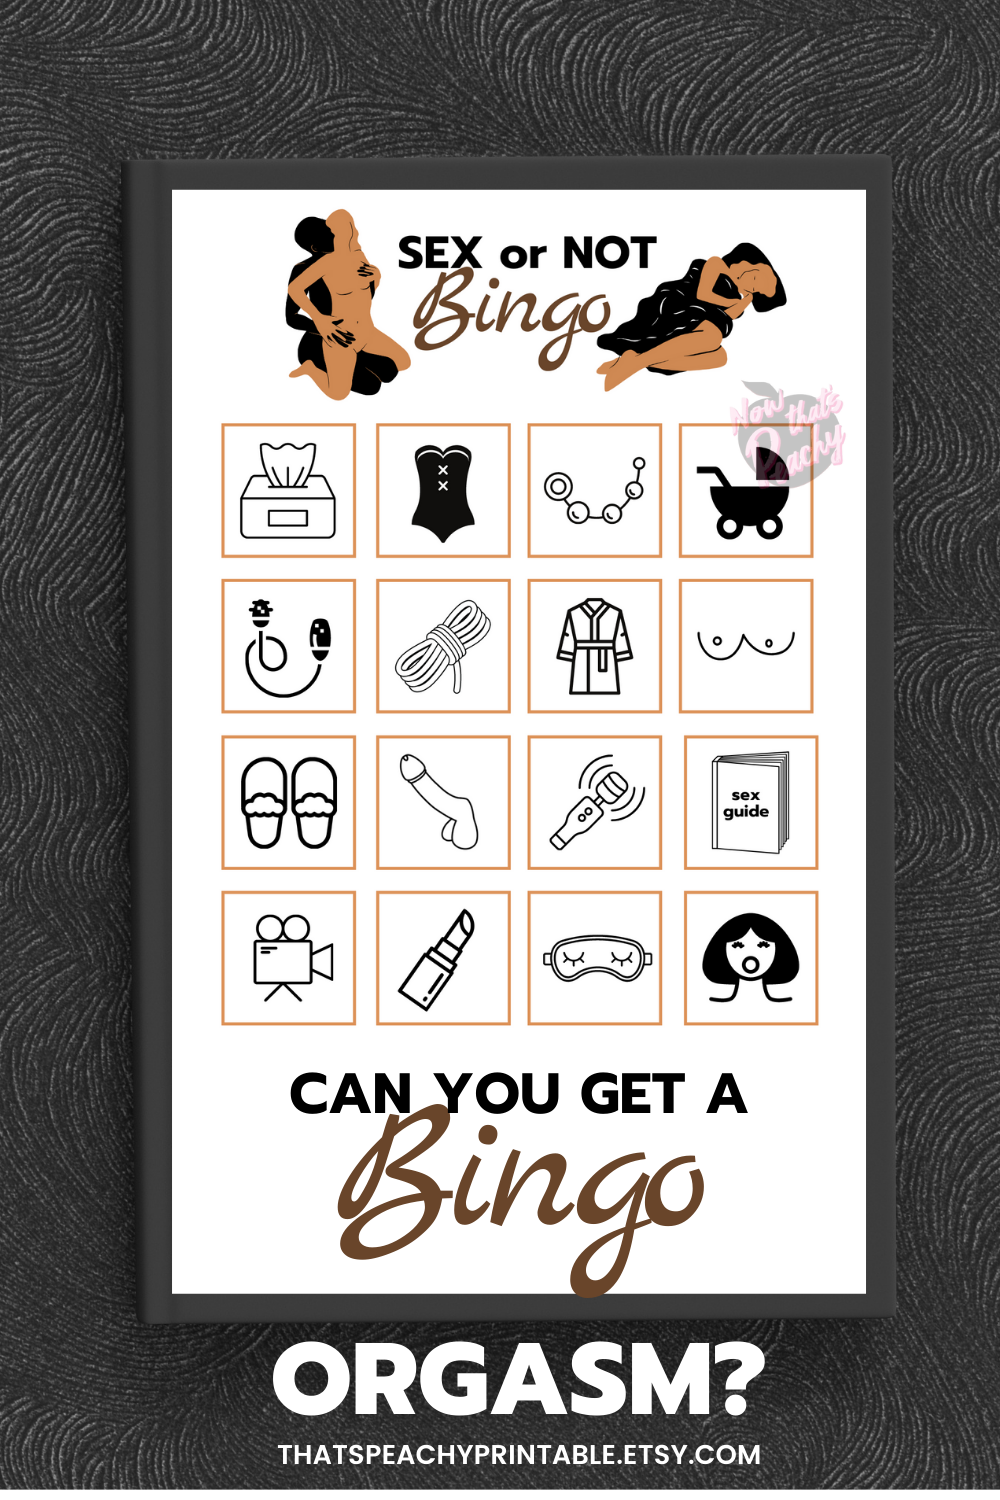 SEX or NOT BINGO Ladies Night game Printable Instant Download, Bachelorette Hens Parties idea, naughty dirty x-rated 18+ adults only